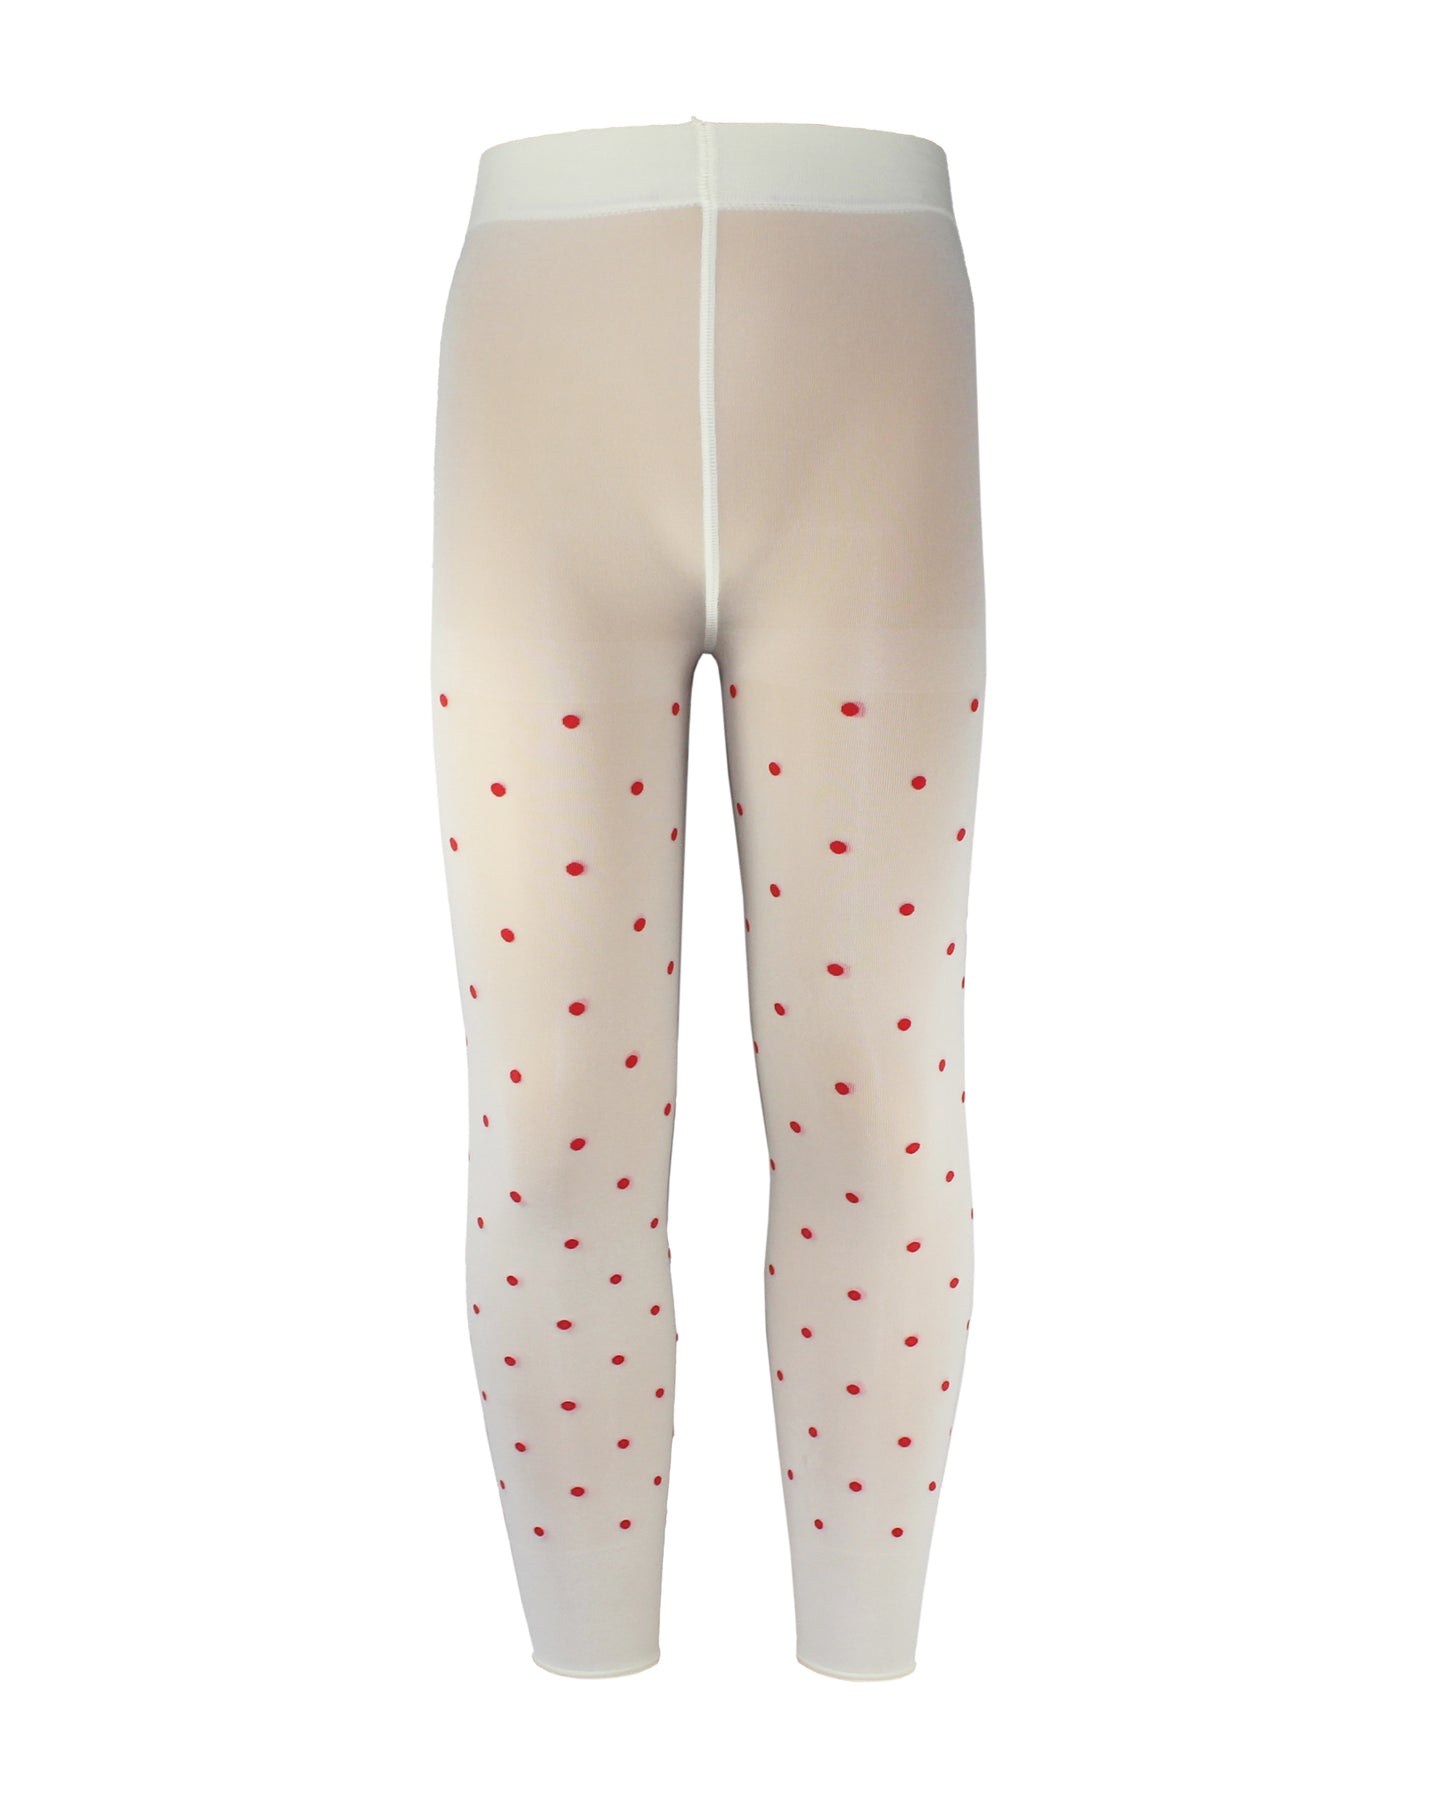 Omsa Papillon Leggings - Soft opaque cream kid's footless tights with an all over red polka dot spot pattern and a striped white and black ribbon bow with red twine on the back.